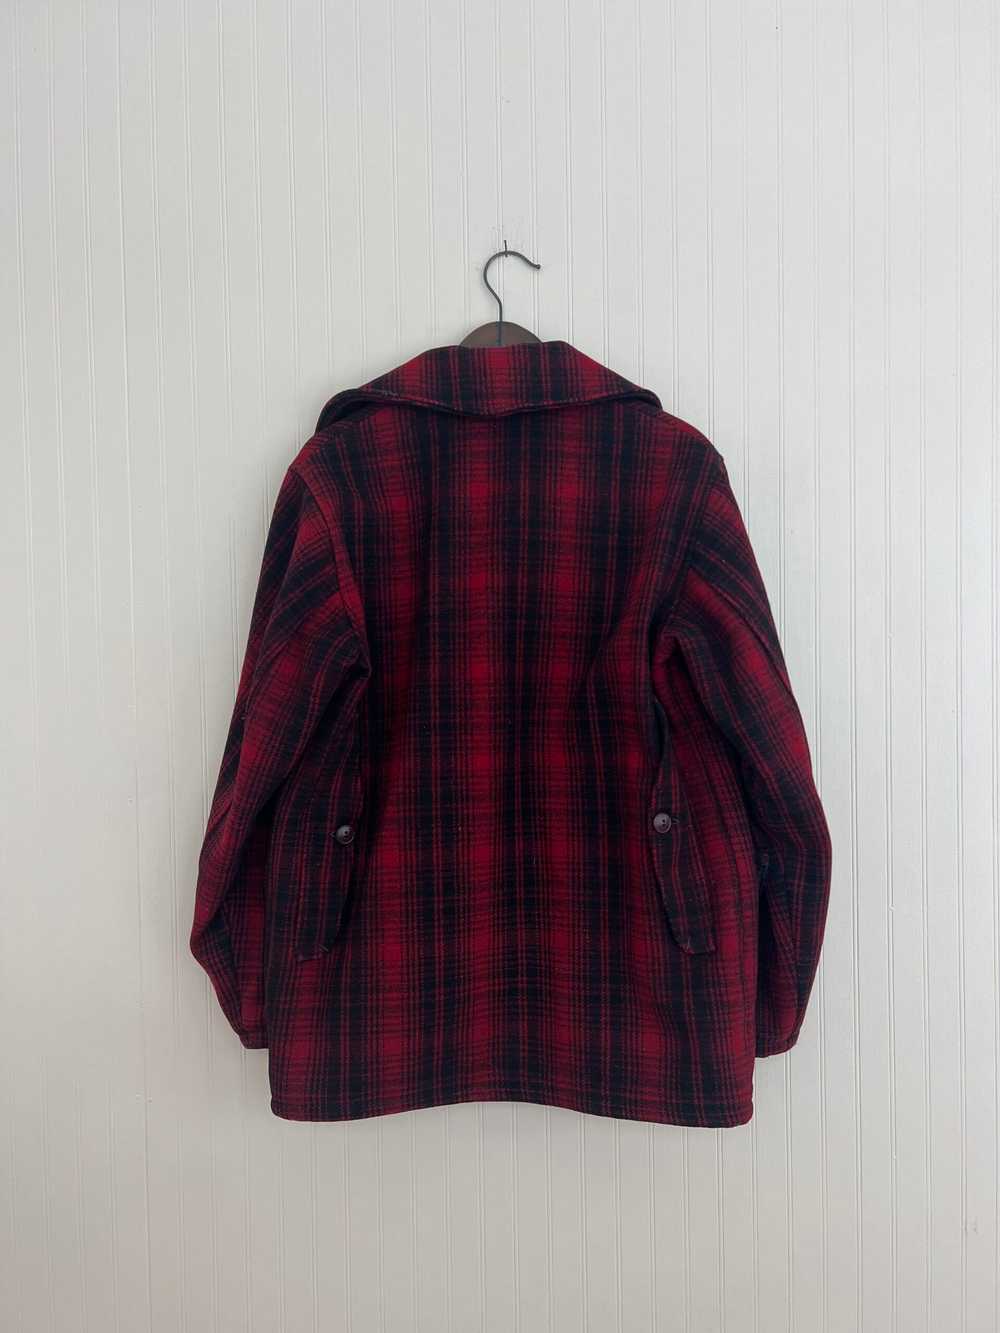 Late 40s/Early 50s Woolrich Mackinaw Wool Jacket - image 8